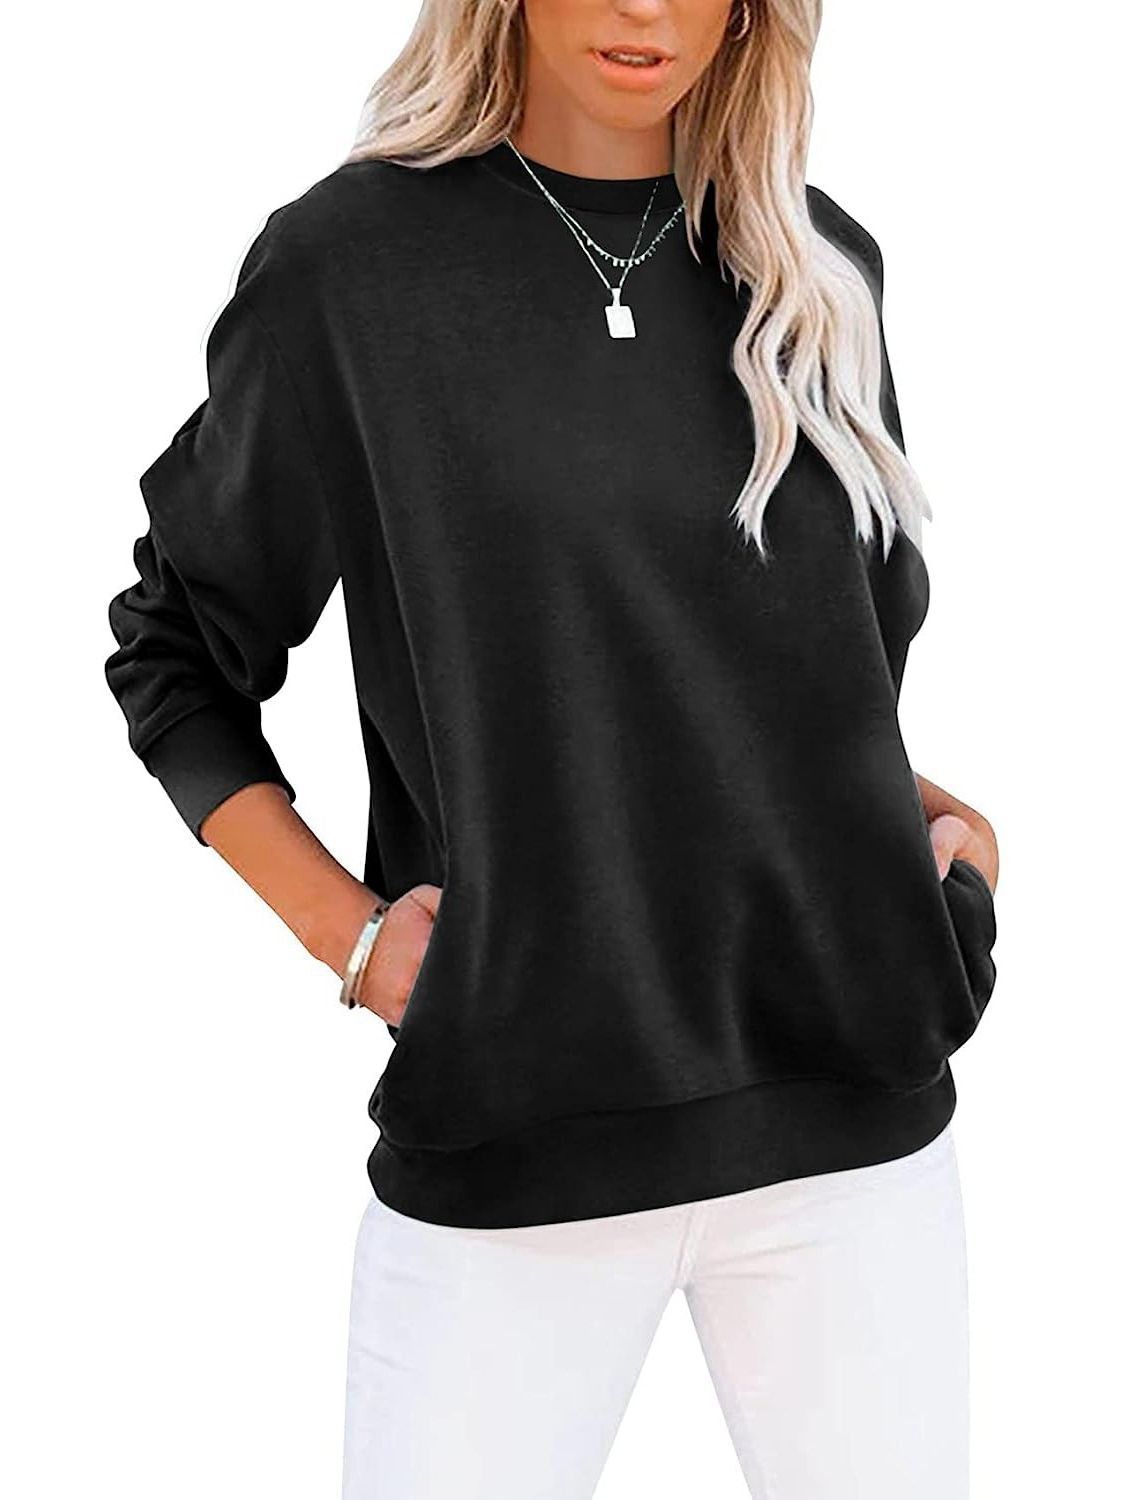 Women's Fashion Casual Round Neck Sports Long-sleeved Top